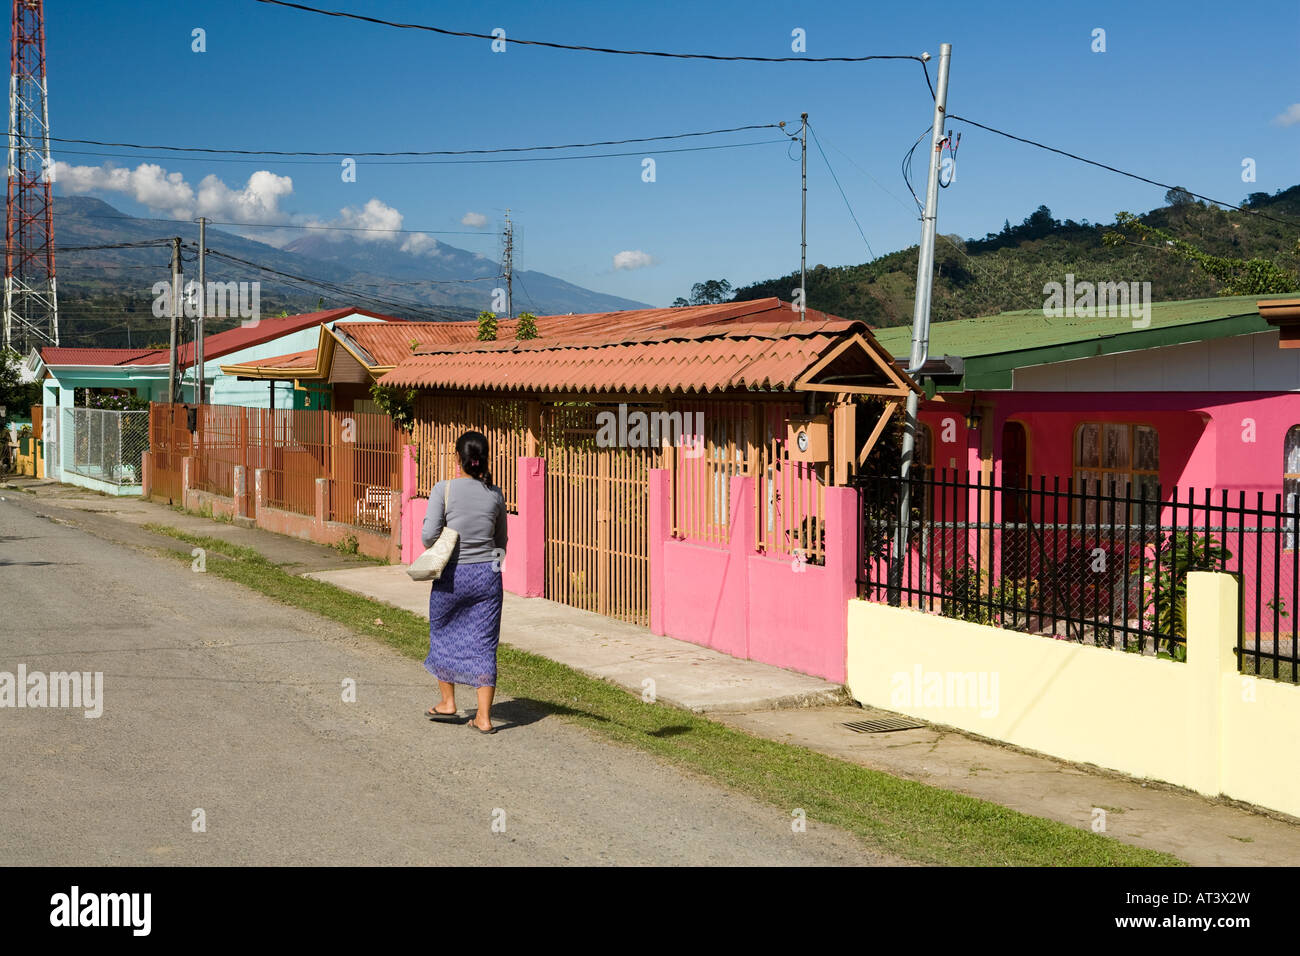 Costa Rica Orosi Village vibrantly painted pink house with security railings outside Stock Photo